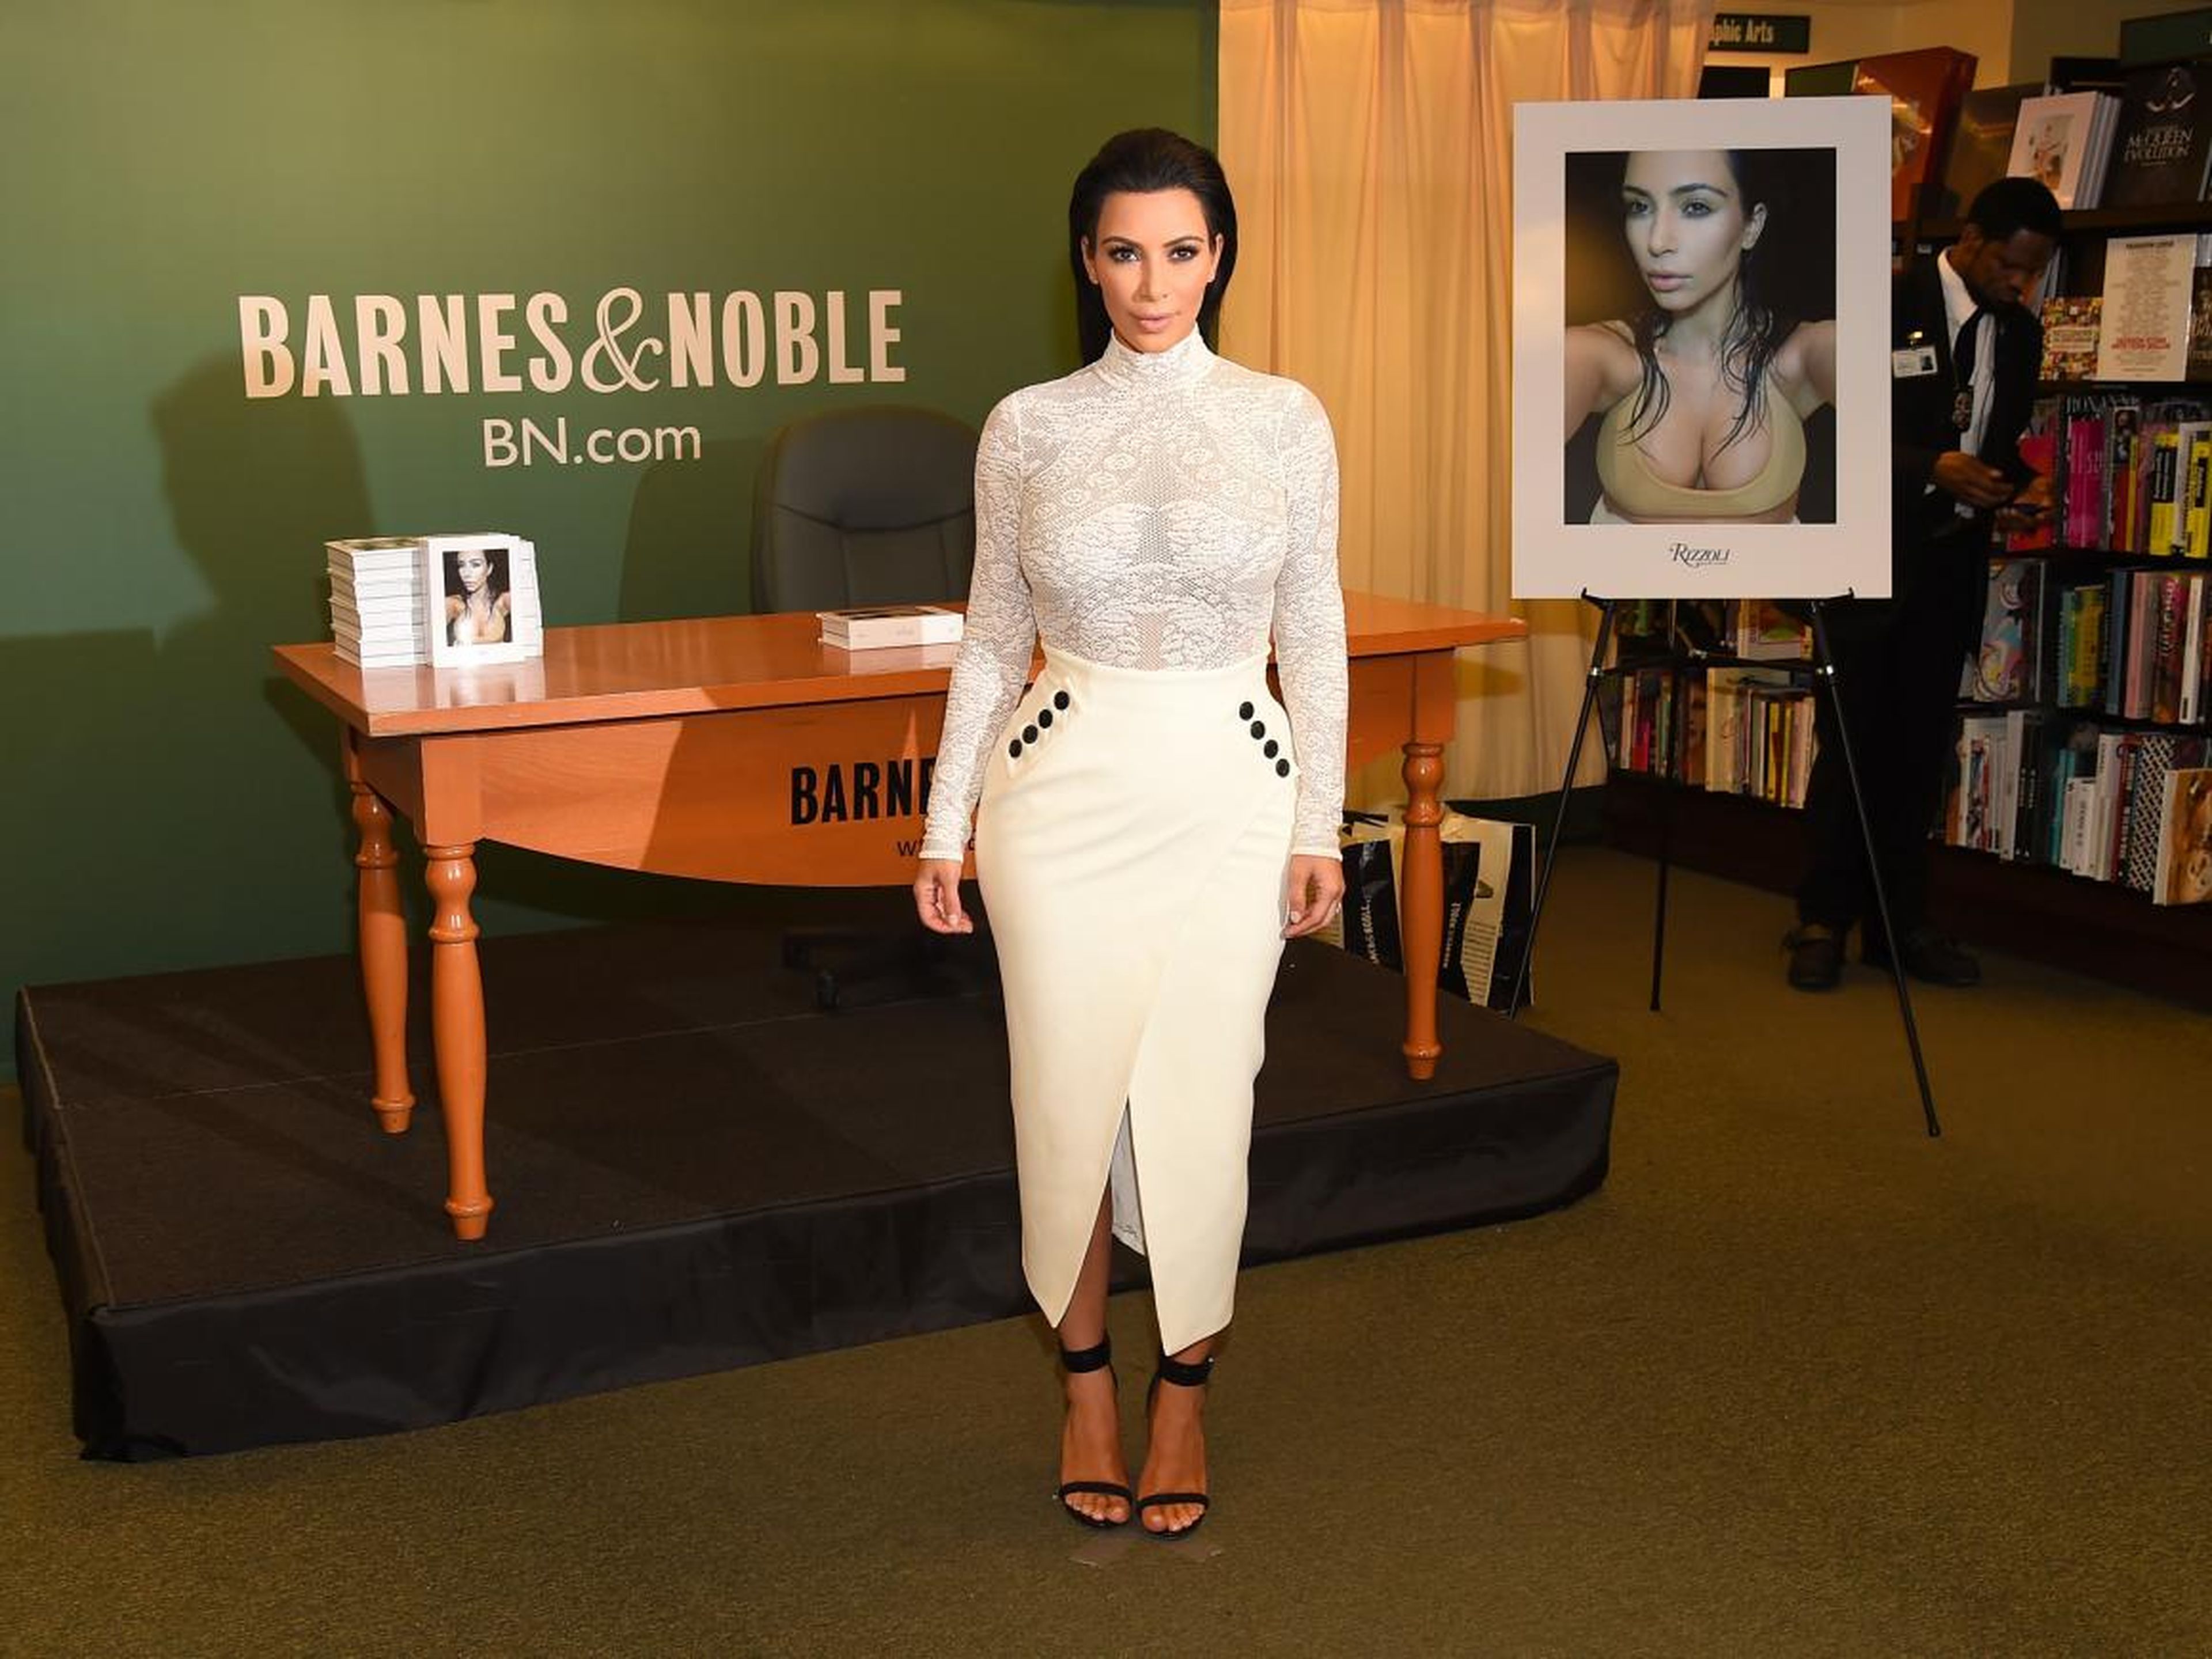 In 2015 Kim published "Selfish" — a small coffee table book filled with 448 pages of selfies she had taken between 2006 and 2014.